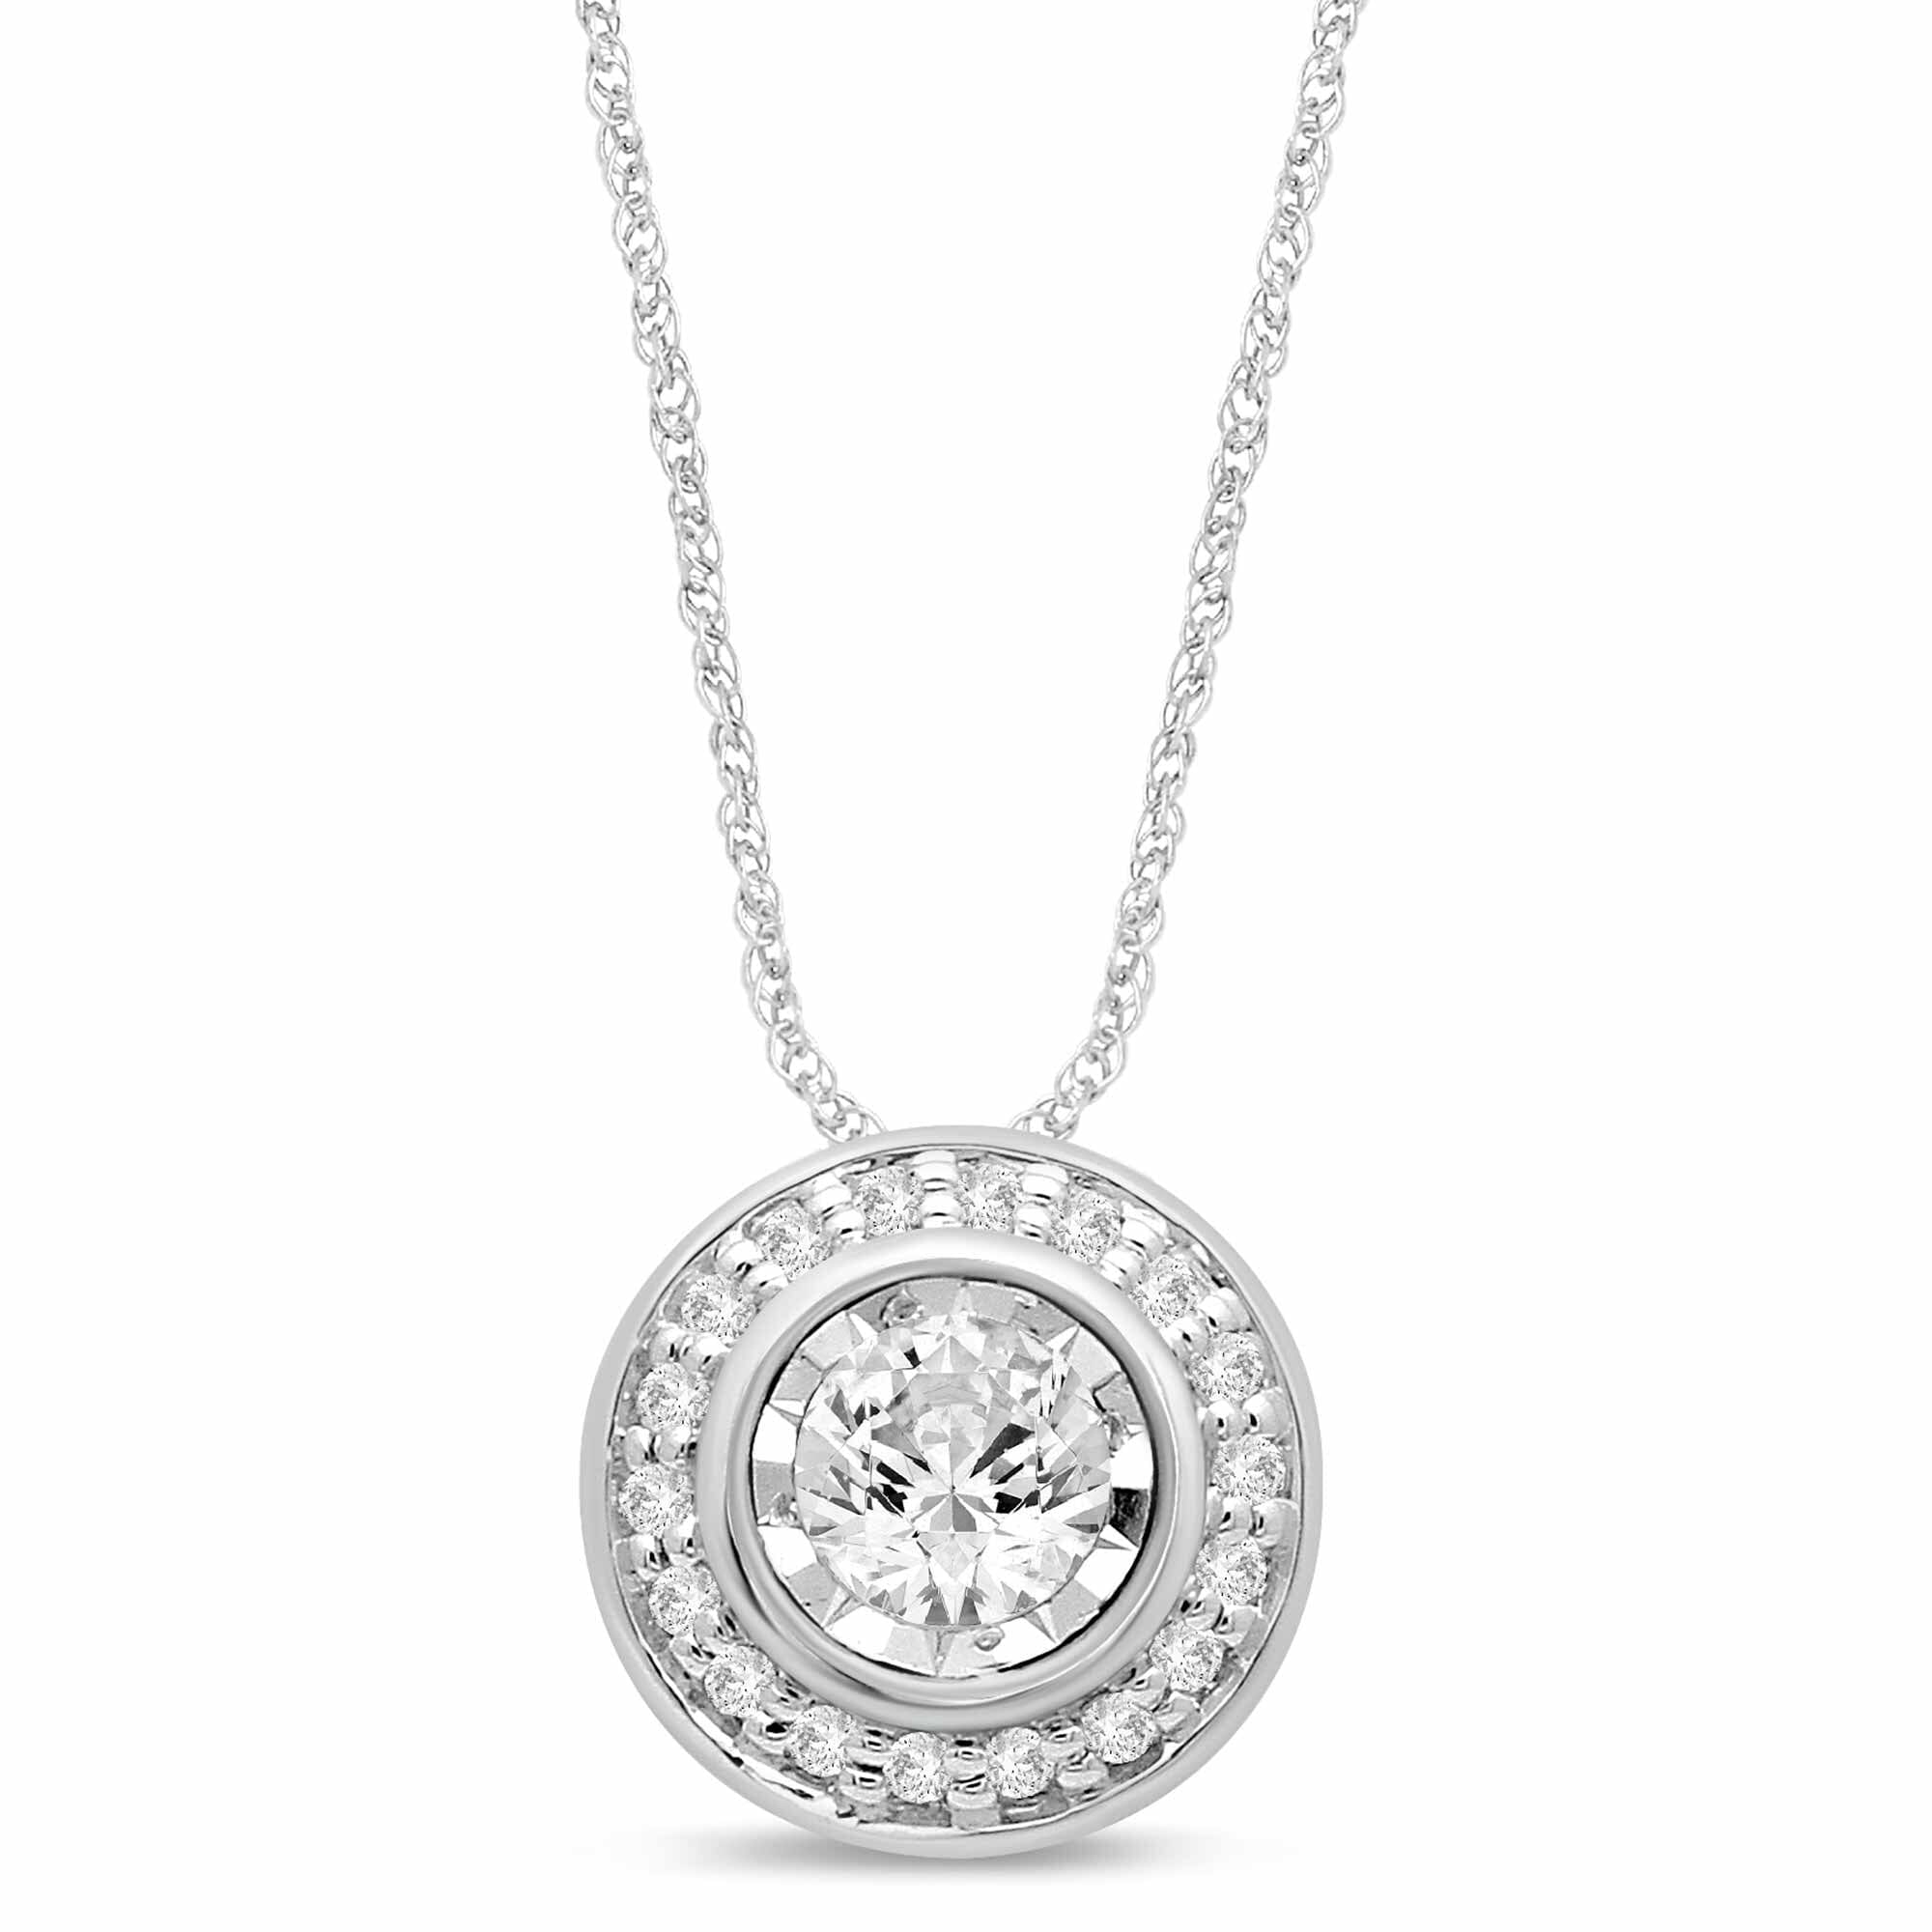 Halo Slider Necklace with 1/4ct of Diamonds in 9ct White Gold Necklaces Bevilles 